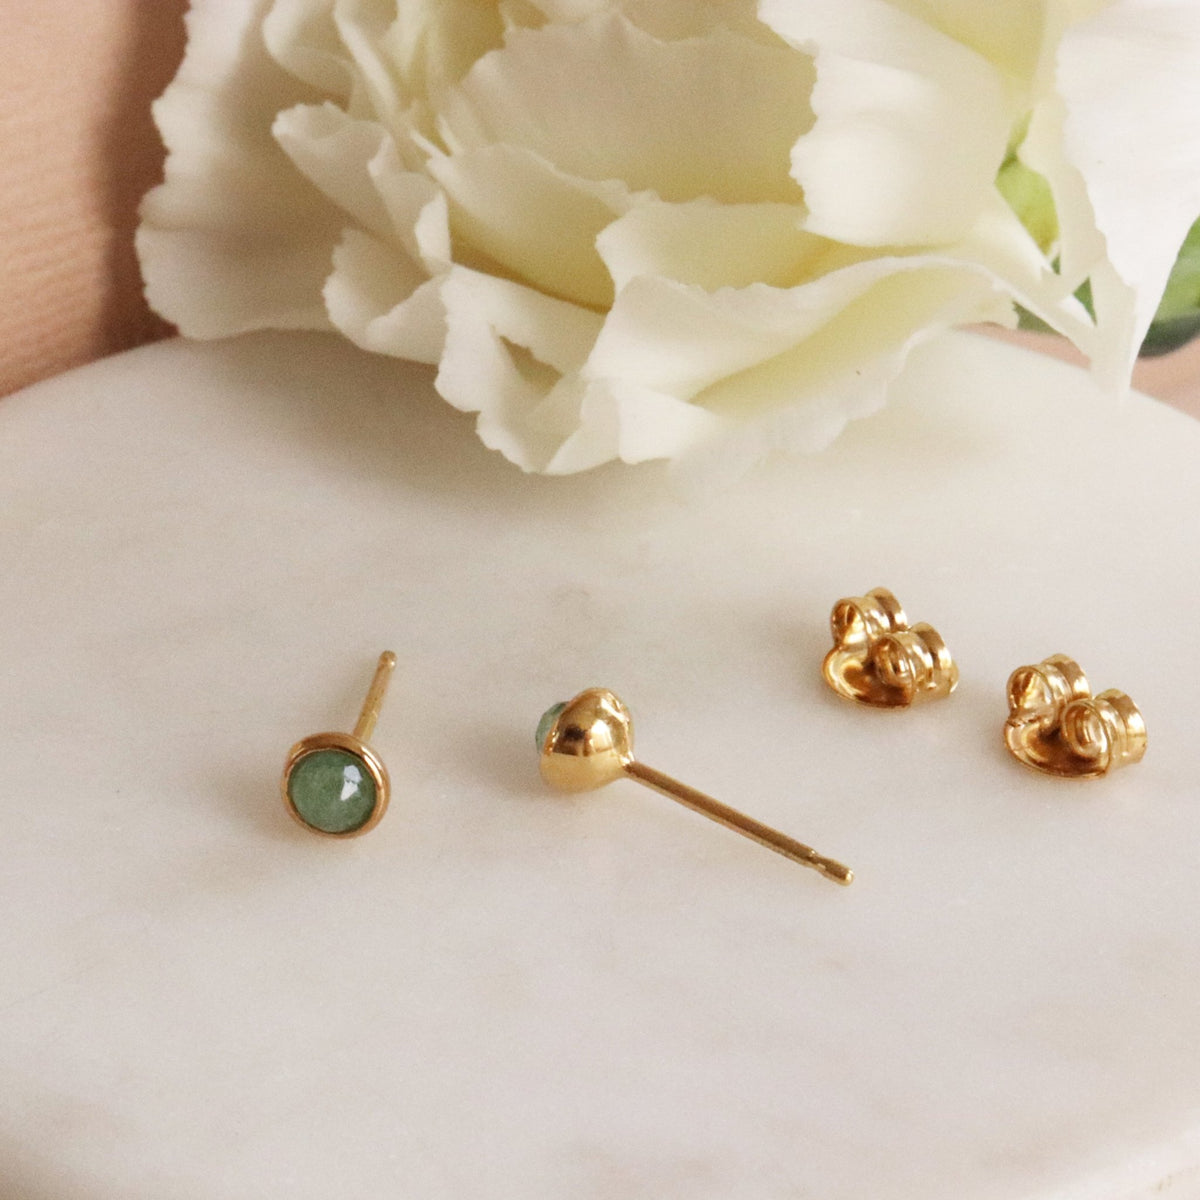 TINY PROTECT STUD EARRINGS - GREEN ONYX &amp; GOLD - SO PRETTY CARA COTTER